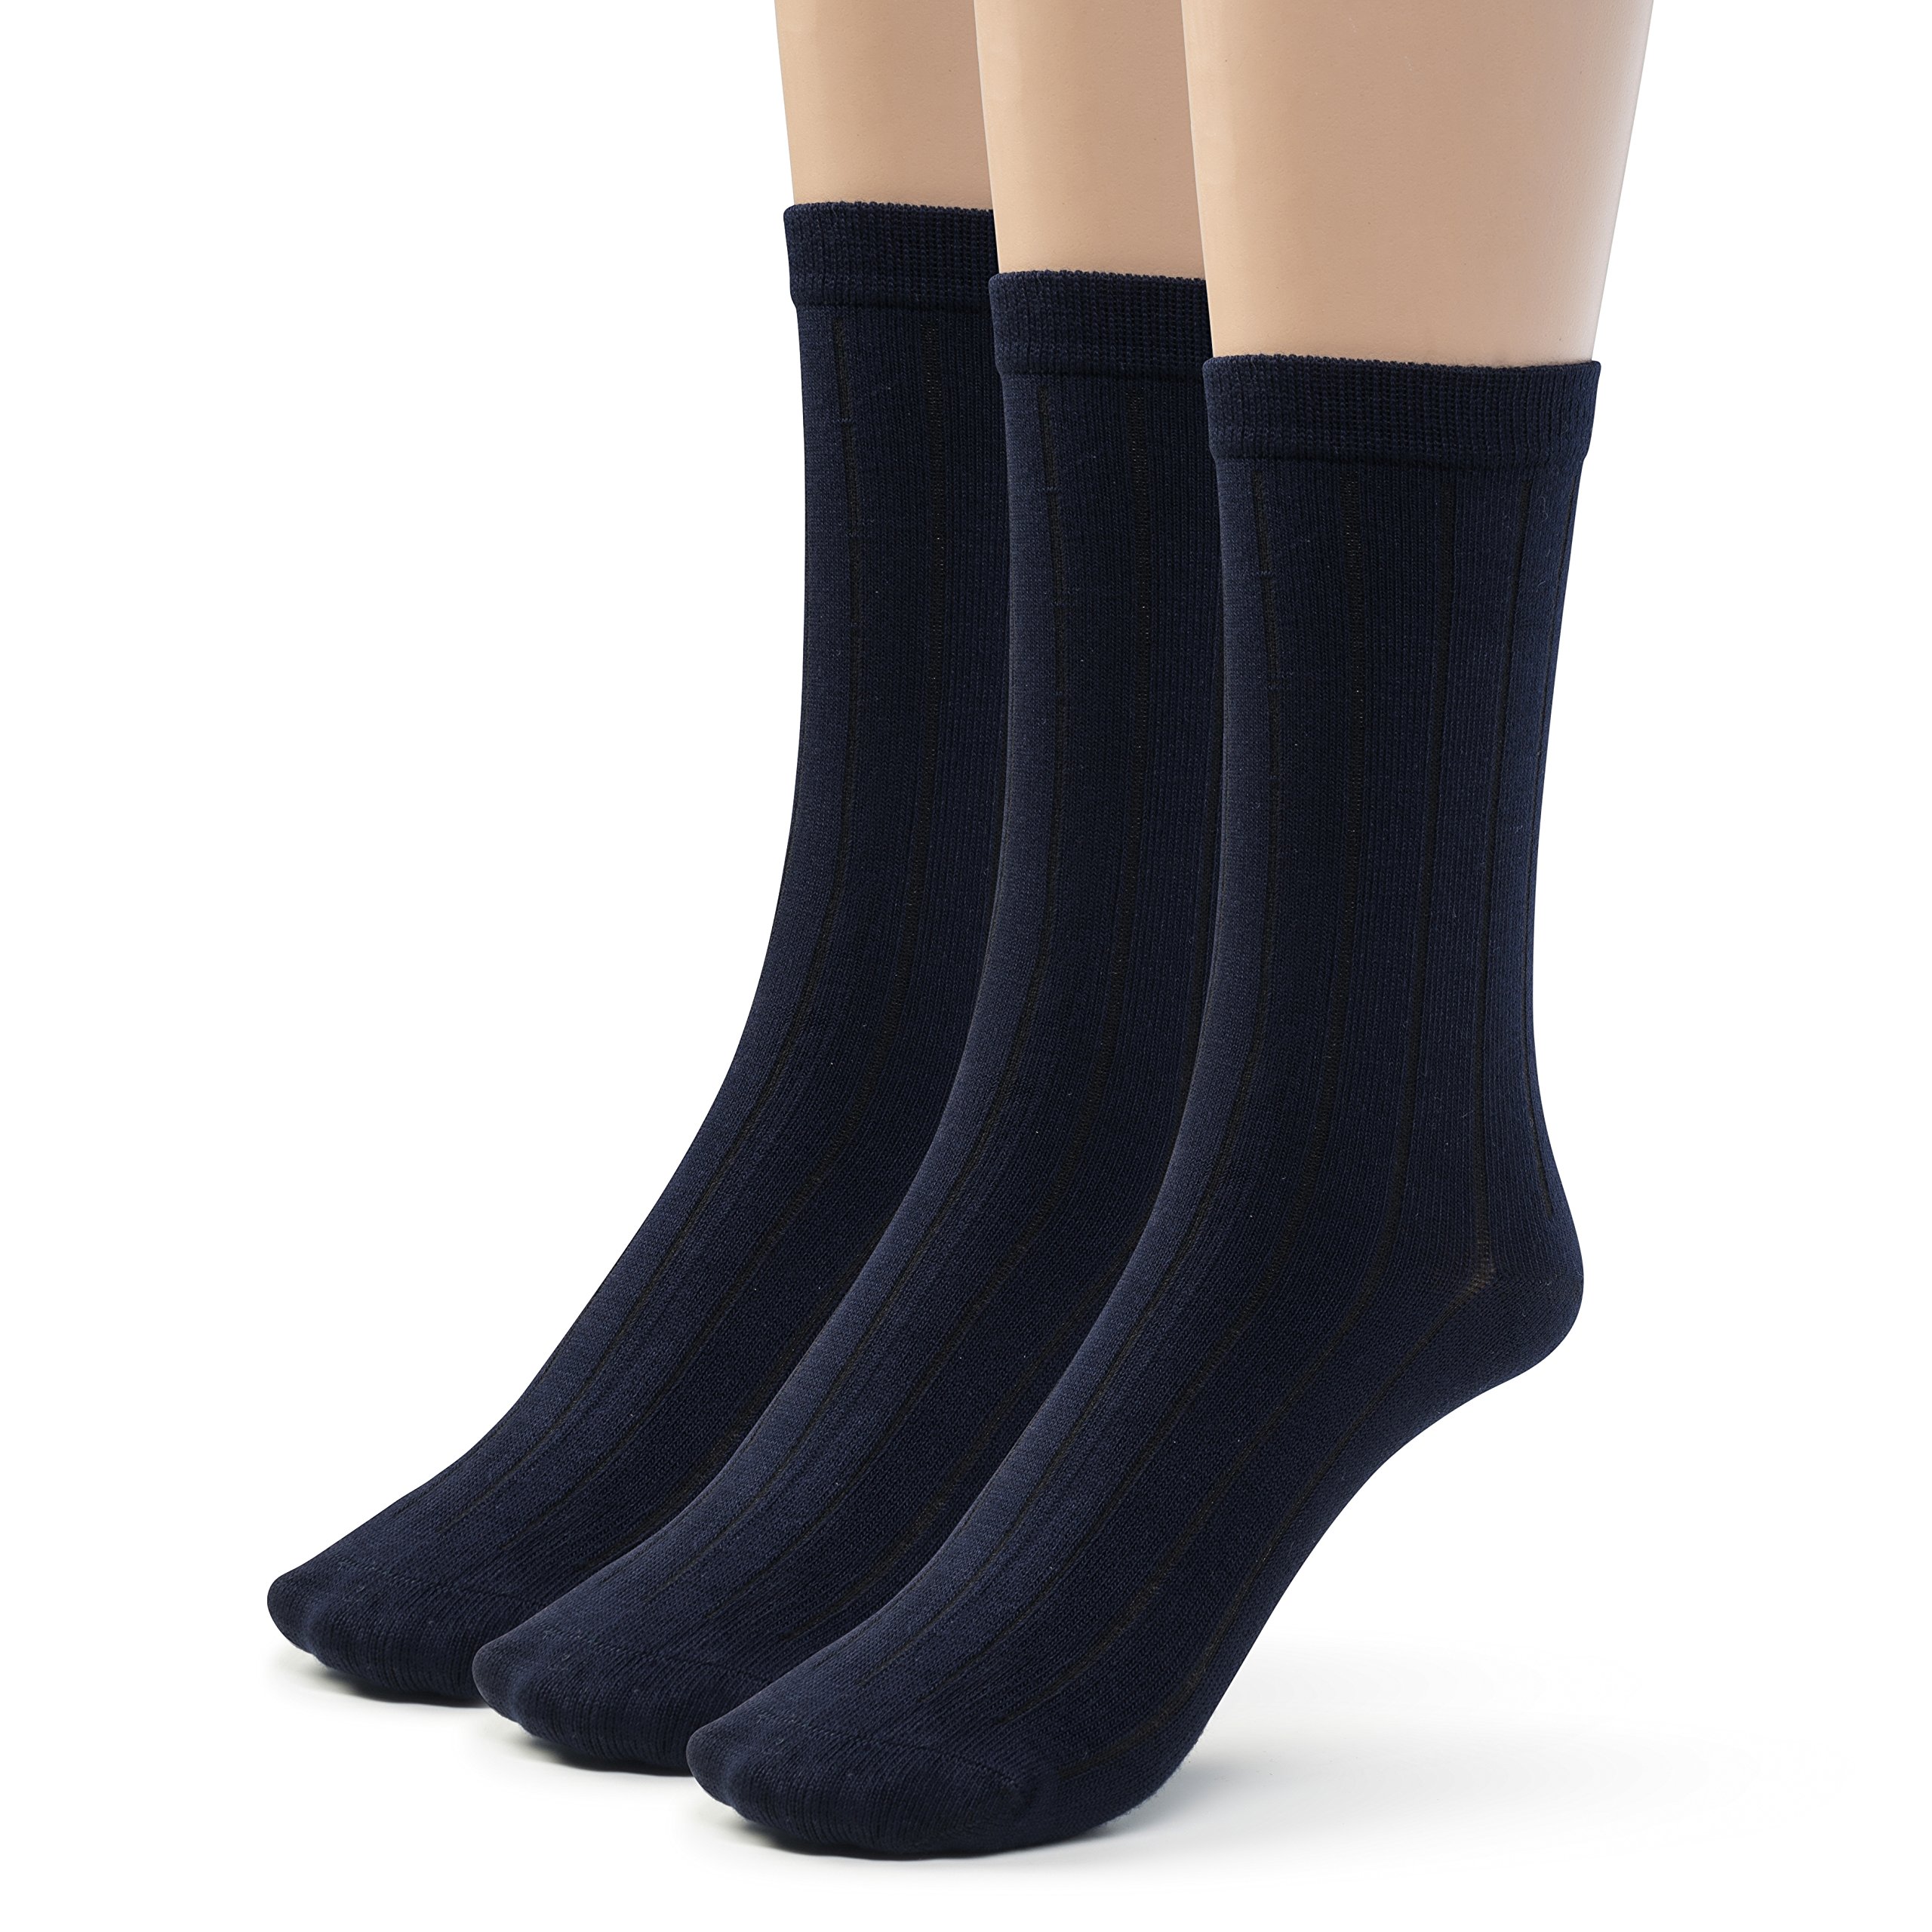 Buy Silky Toes Bamboo Seamless Crew Socks for Boys Girls, 3 or 6